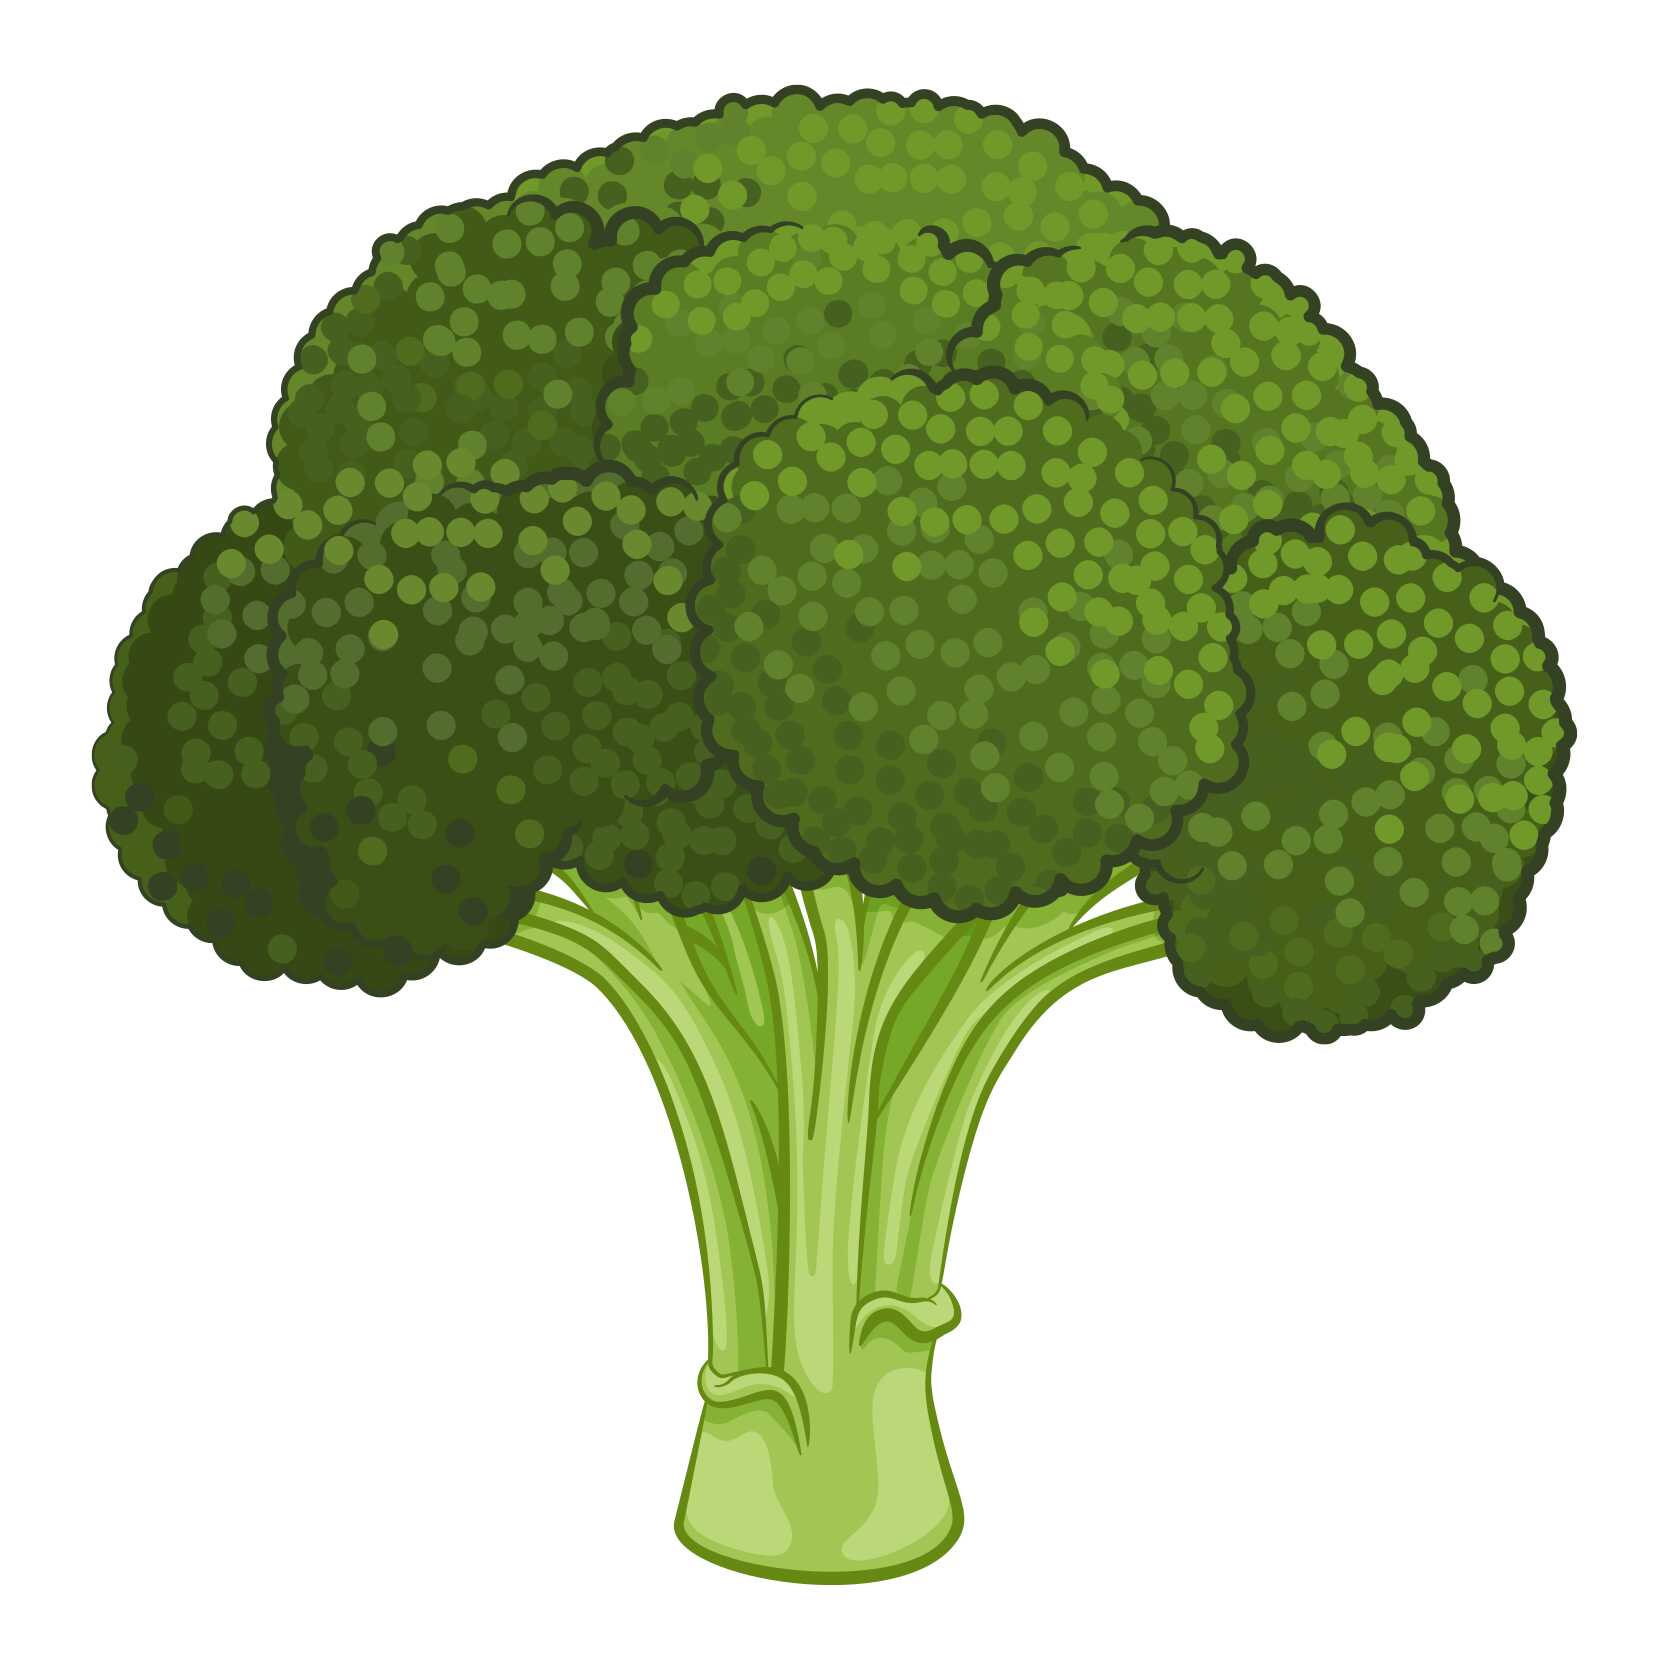 English vocabulary with pictures - Broccoli